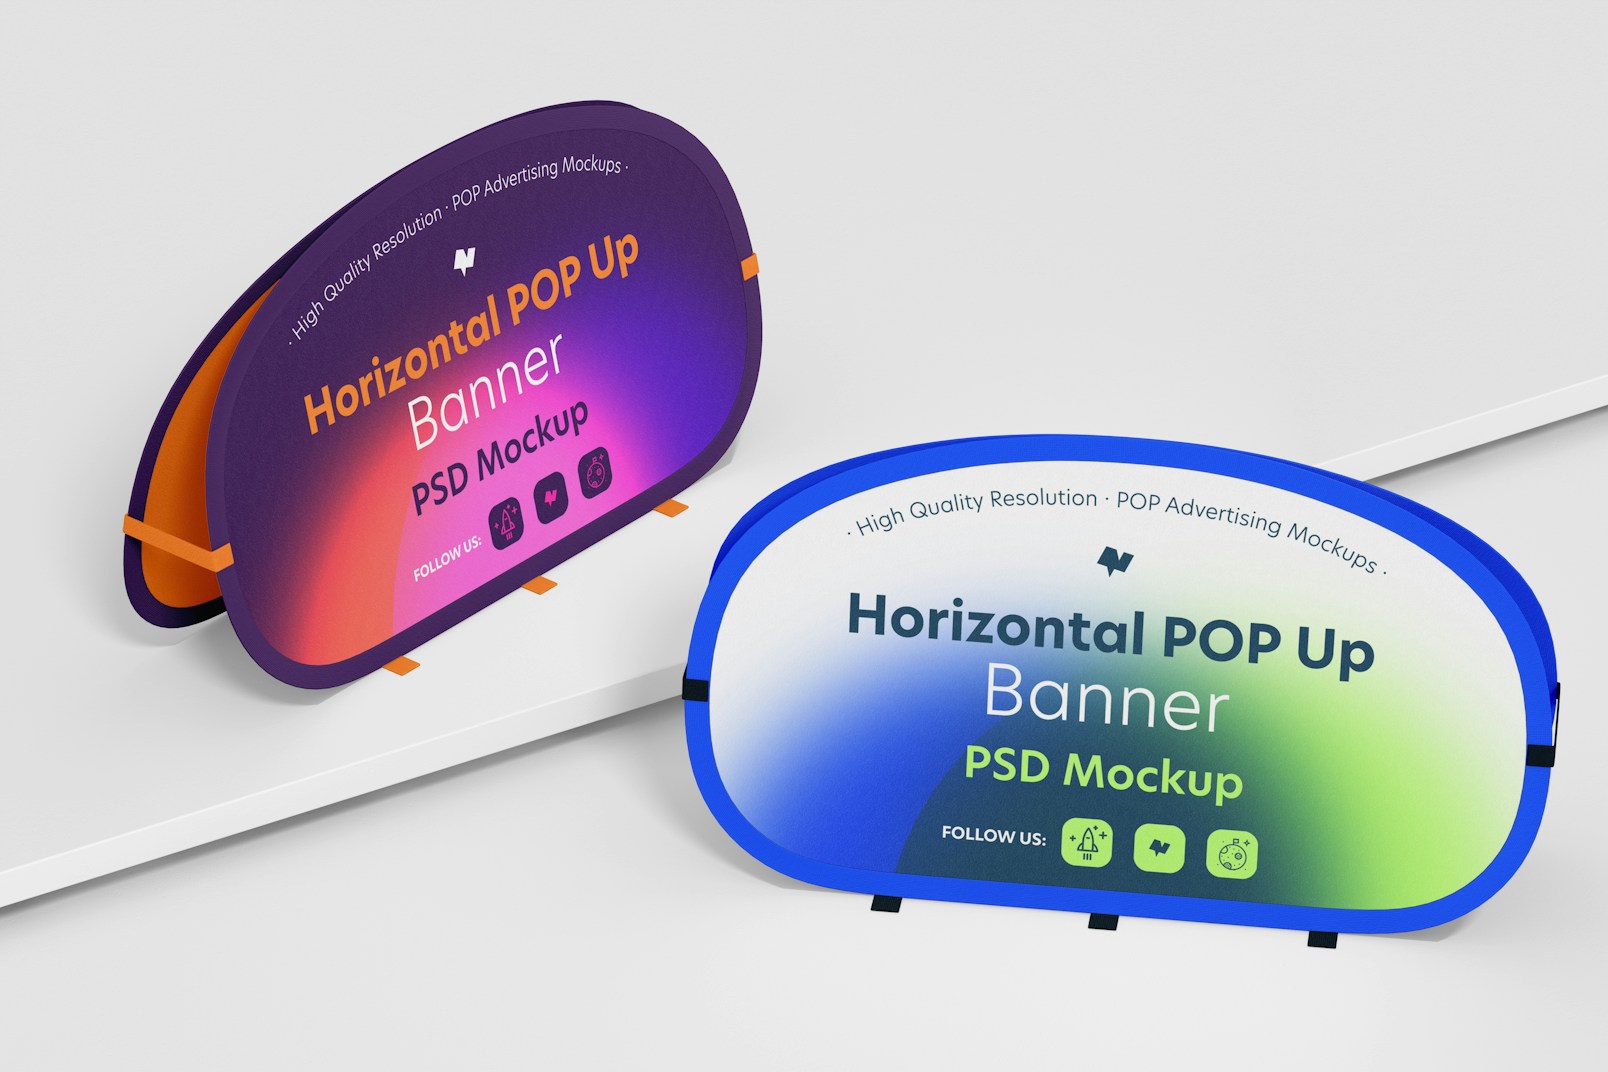 Horizontal Pop Up Banners Mockup, Perspective